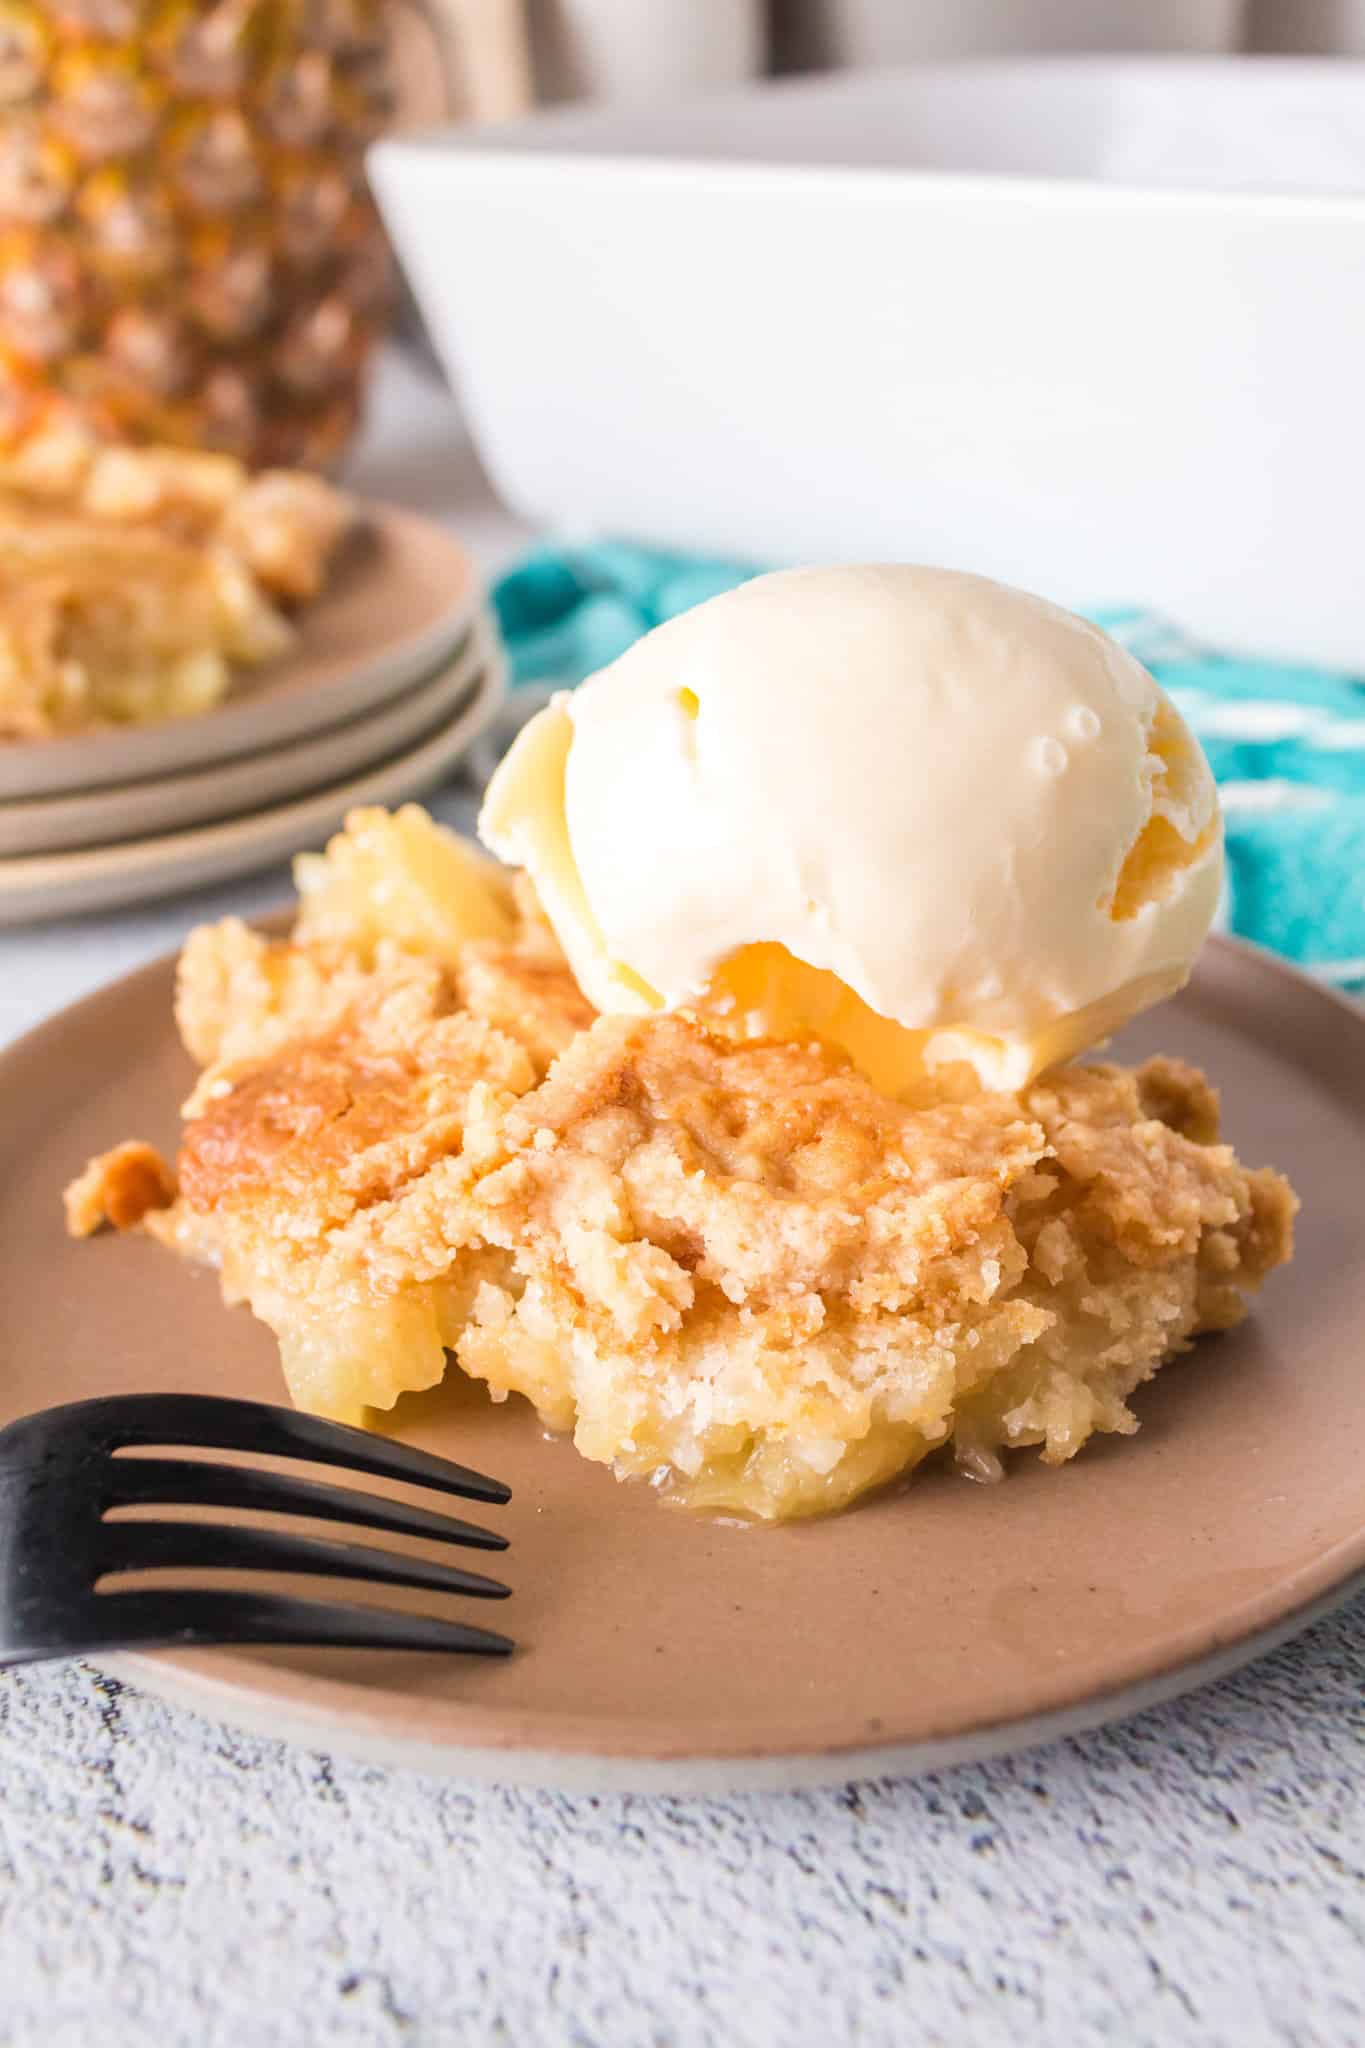 Pineapple Dump Cake is an easy dessert recipe using canned pineapple and boxed cake mix.